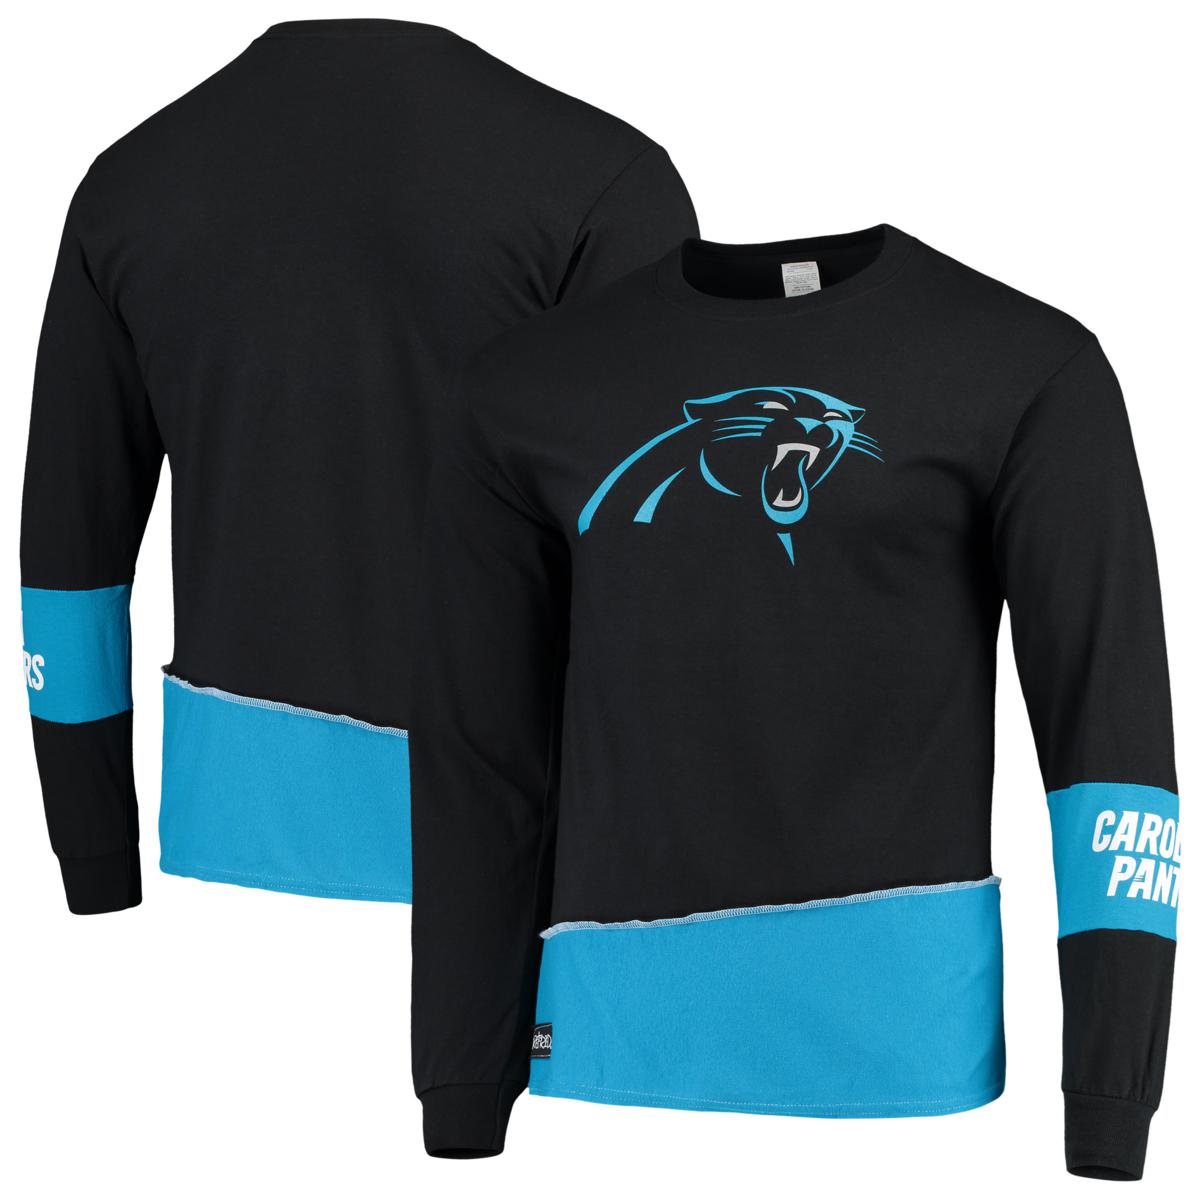 Men's Refried Apparel Black/Blue Carolina Panthers Upcycled Angle Long Sleeve T-Shirt, Size: Small